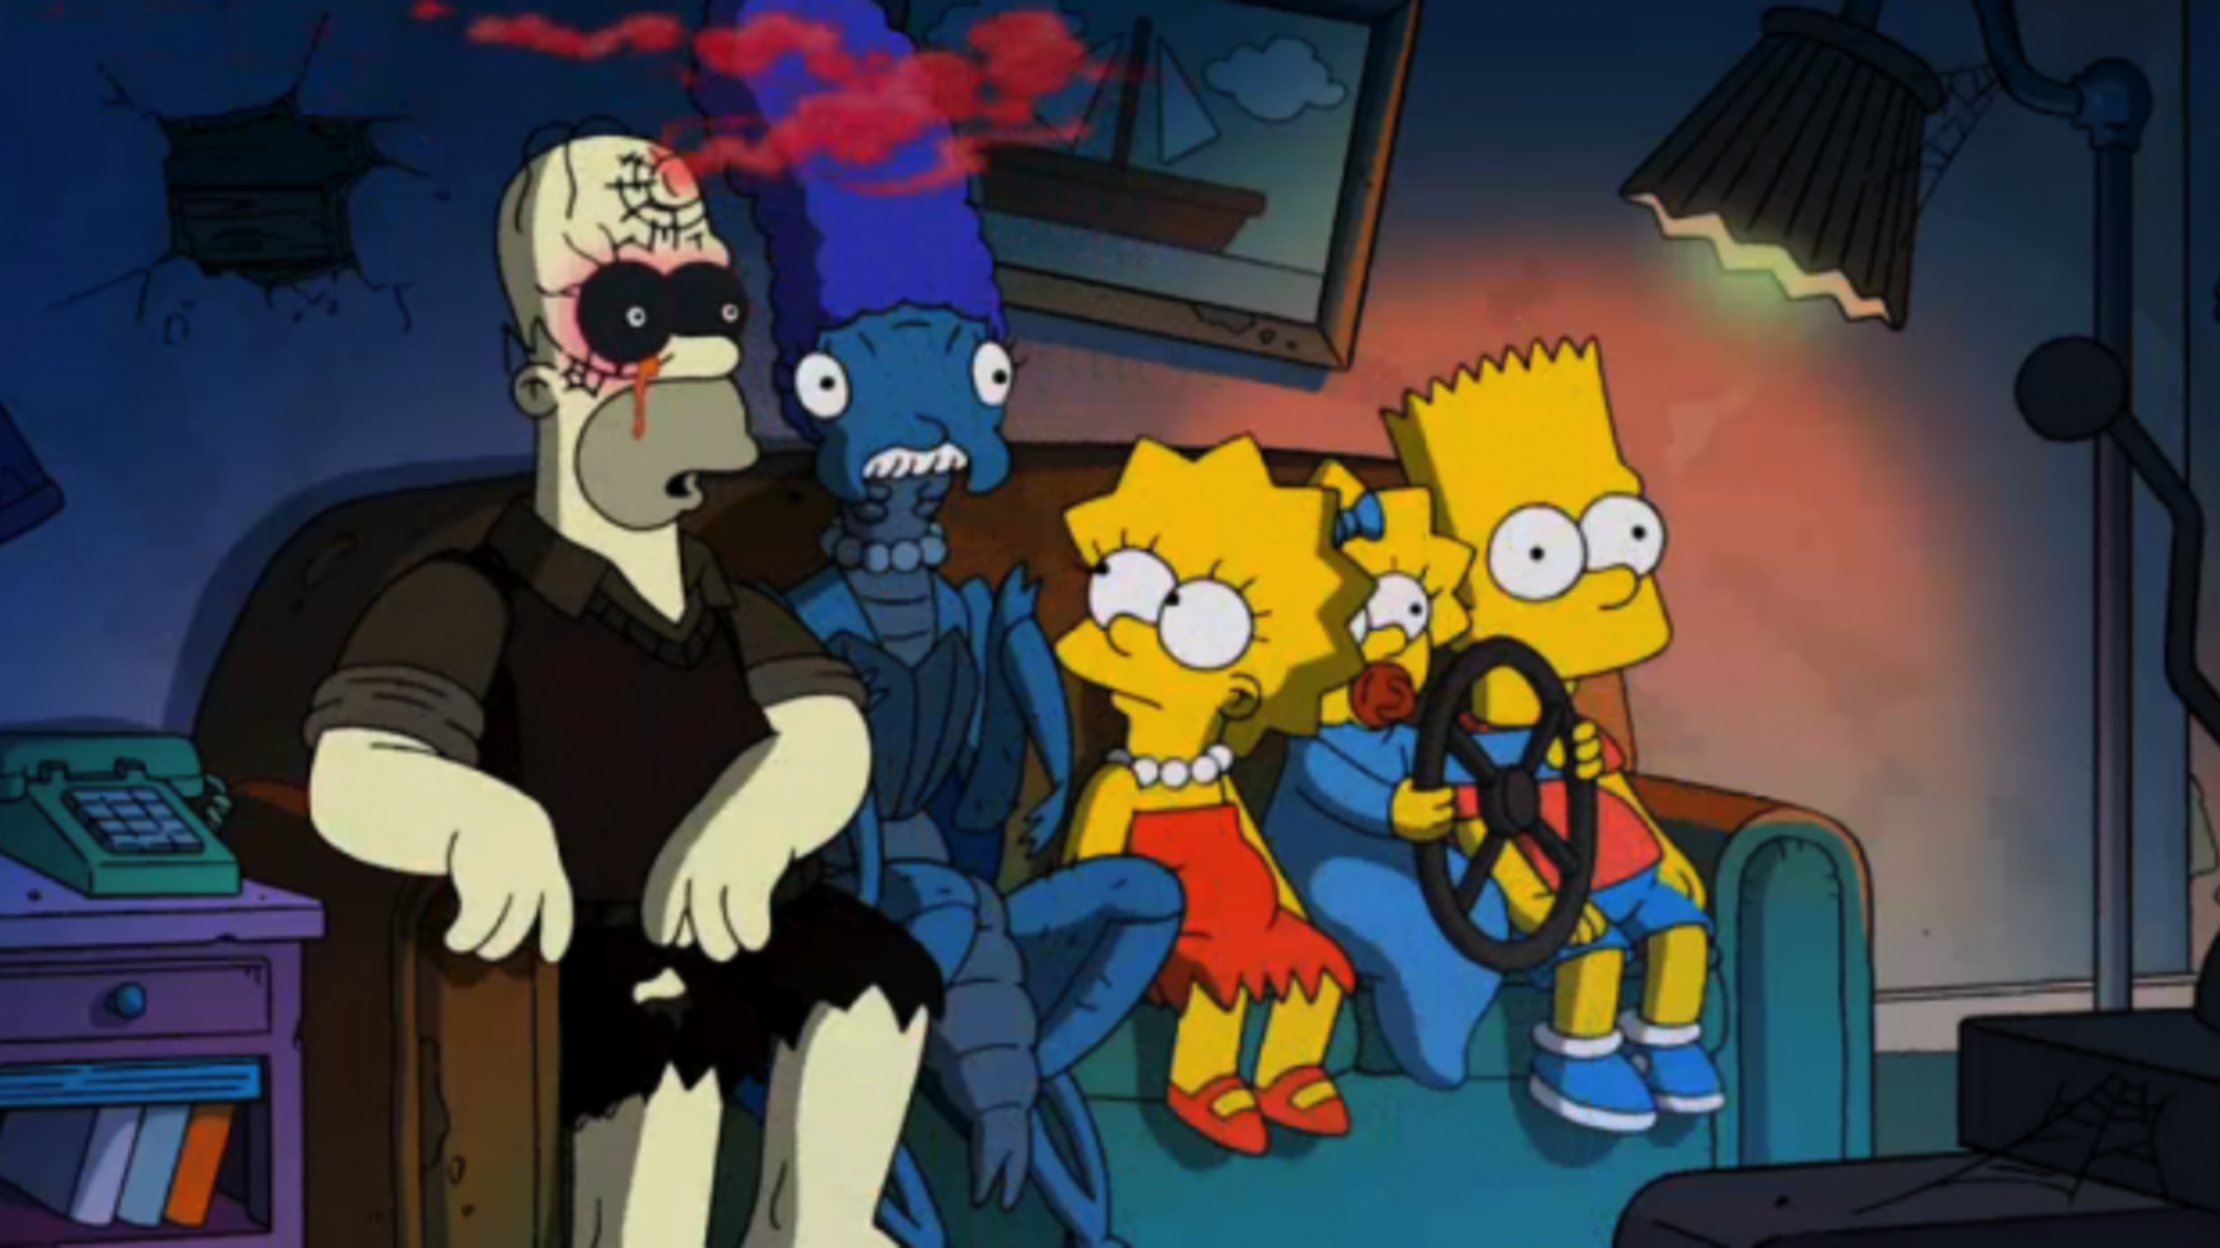 treehouse of horror time travel